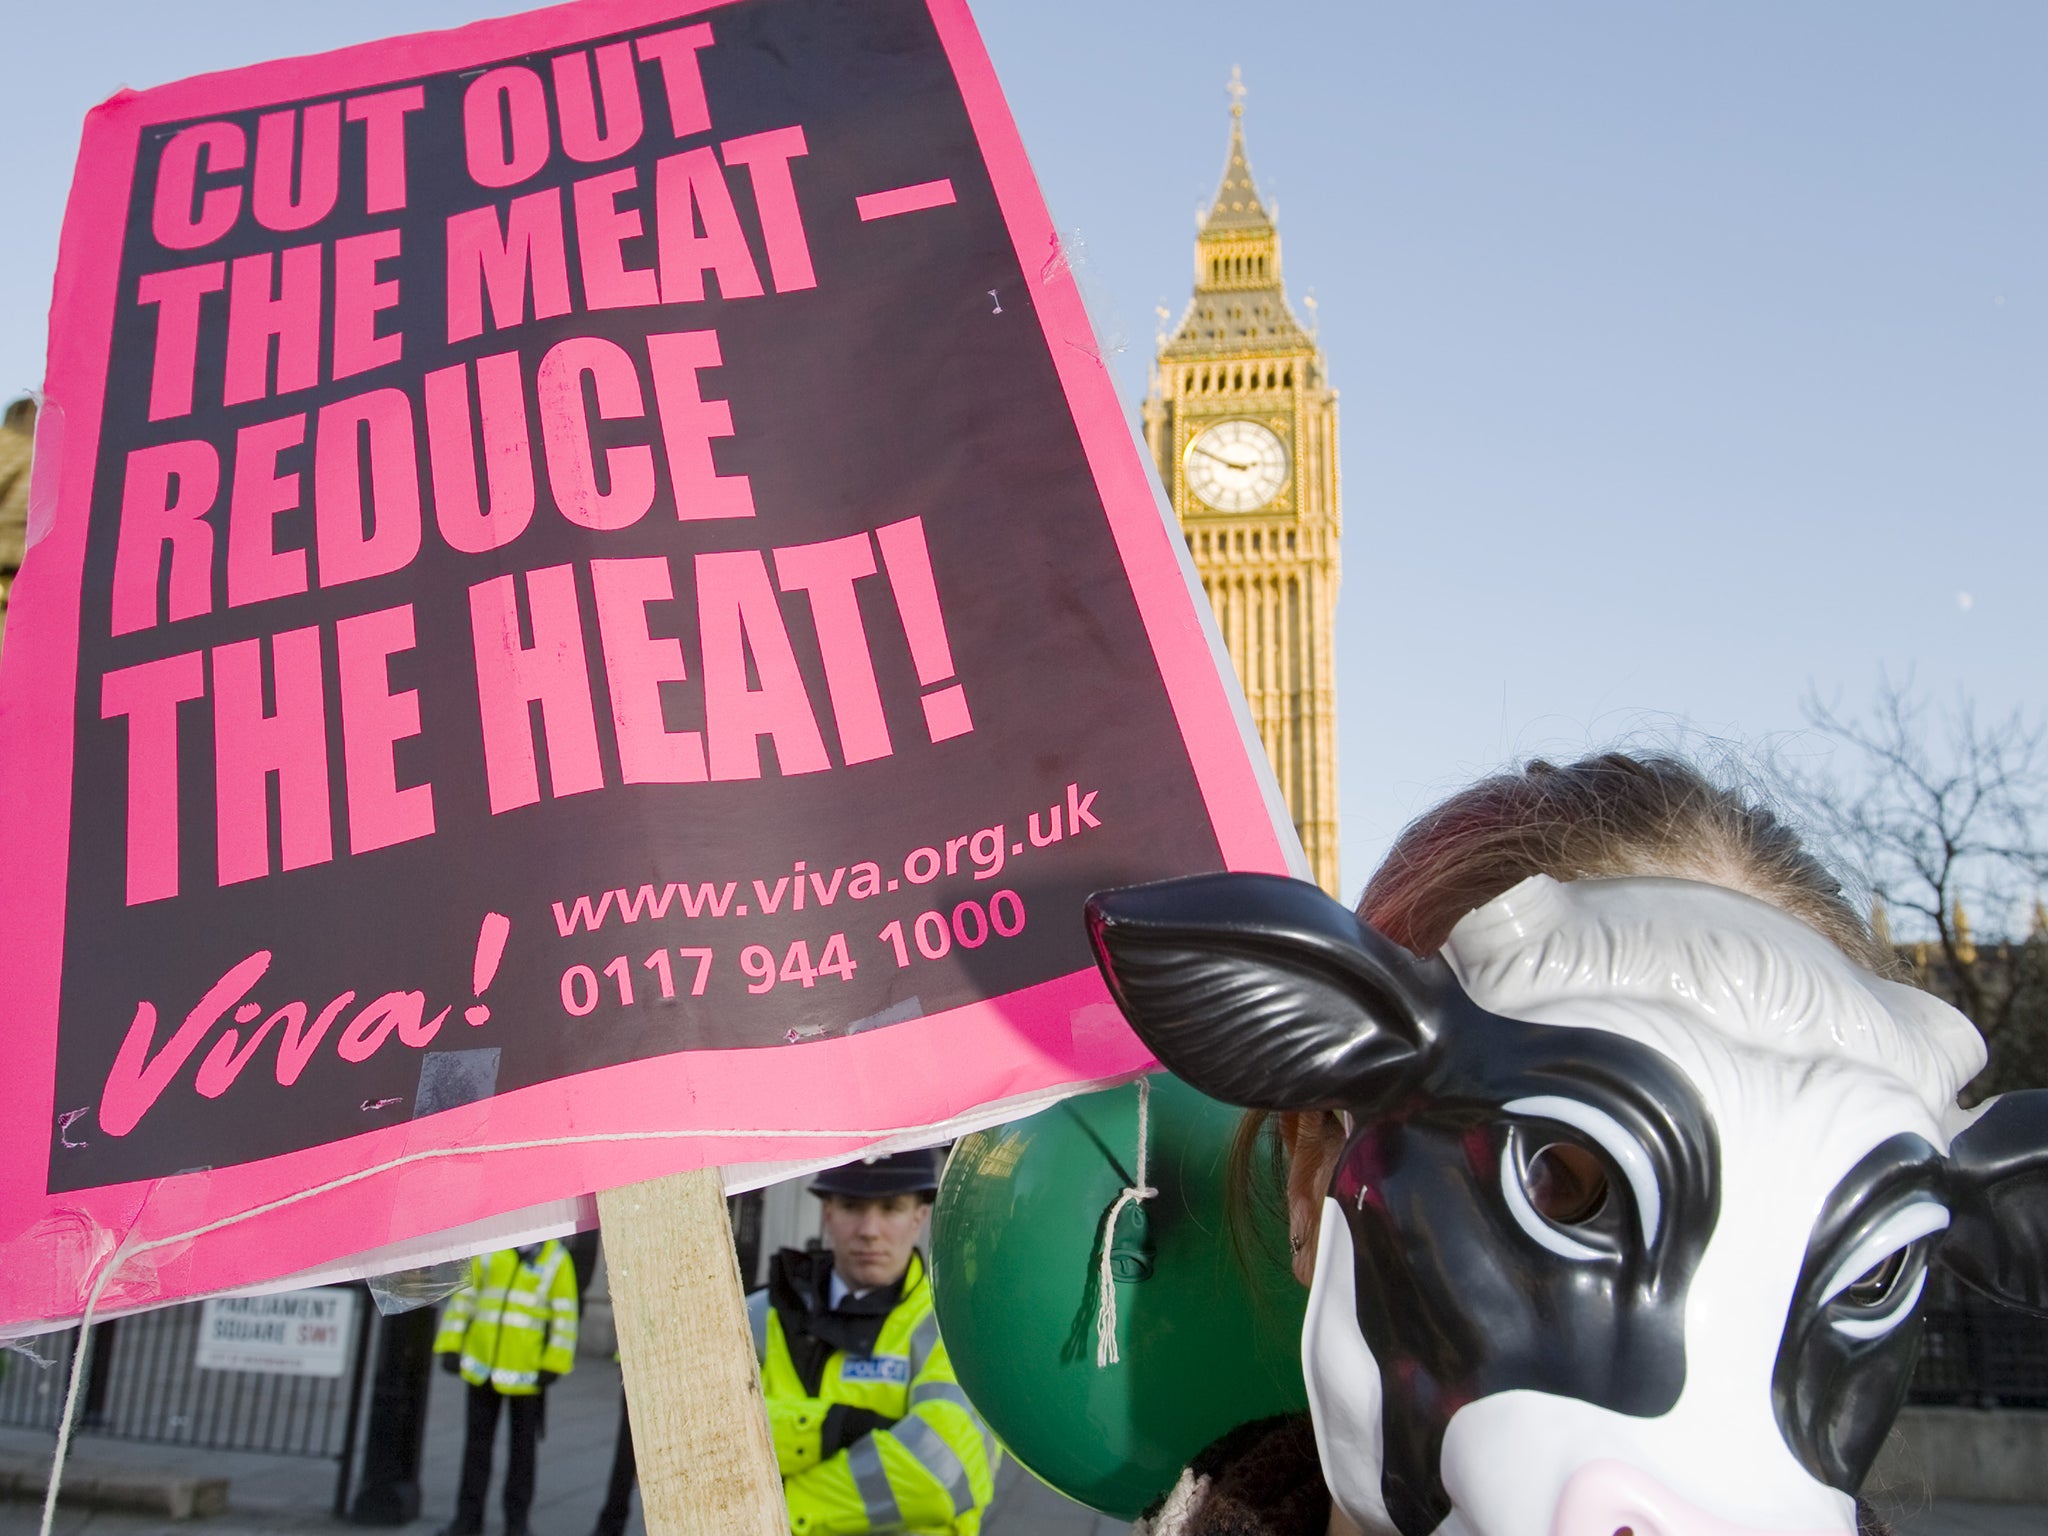 Measures such as cutting consumption of red meat and dairy products are seen as key ways of tackling global warming